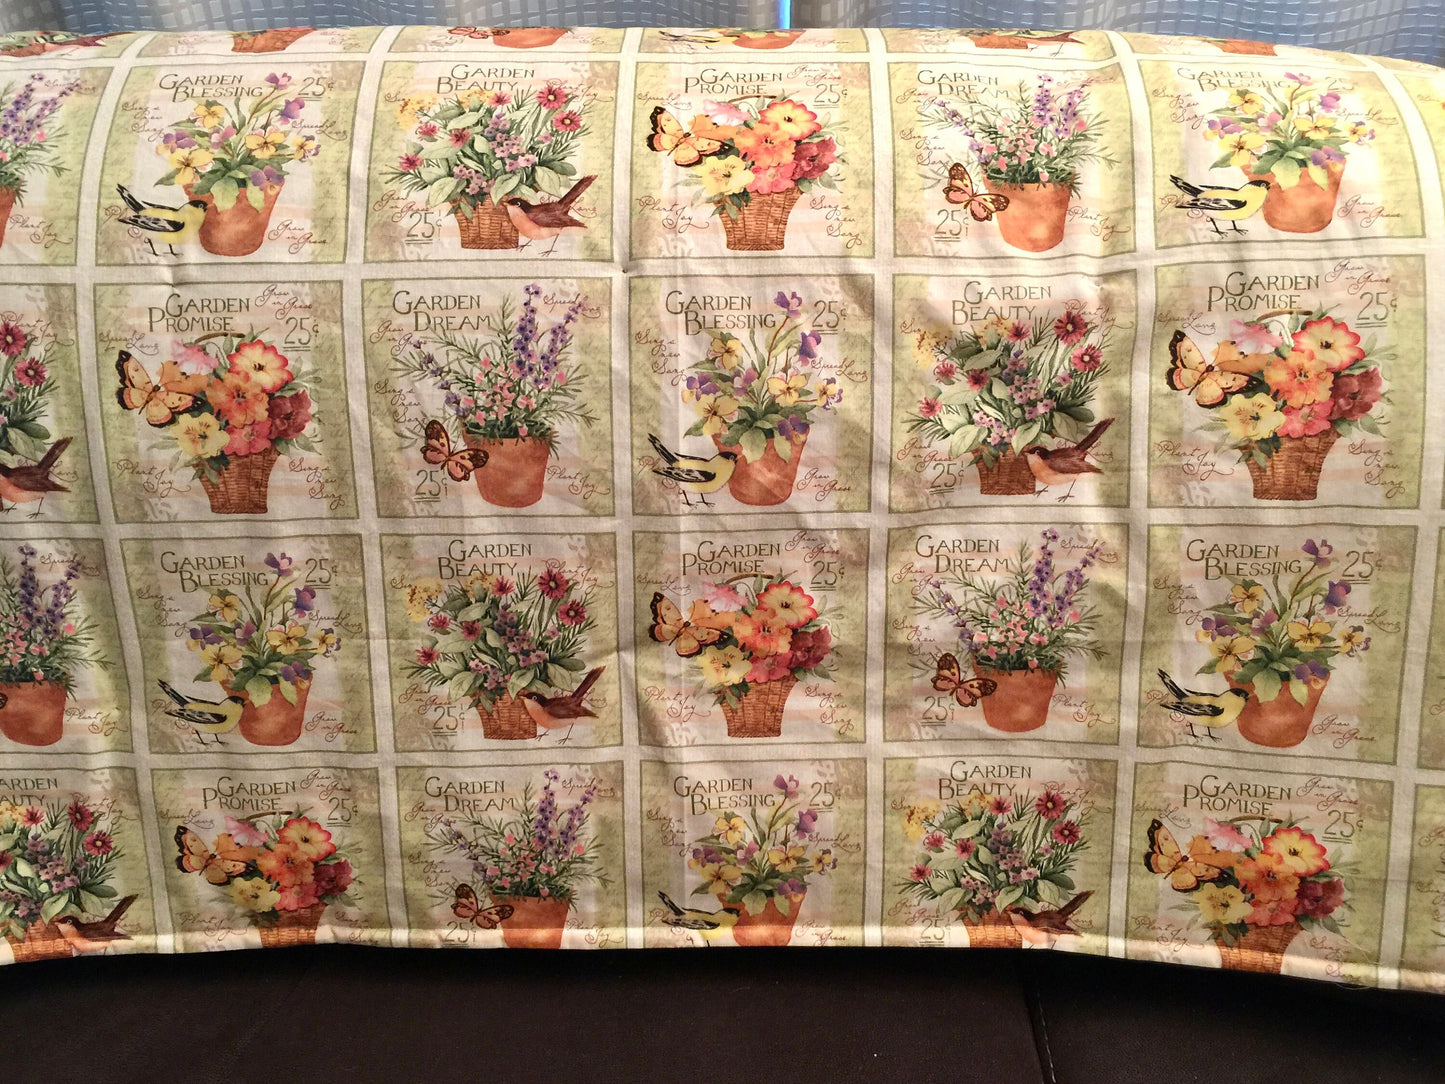 The most beautiful flower garden blanket and reversible